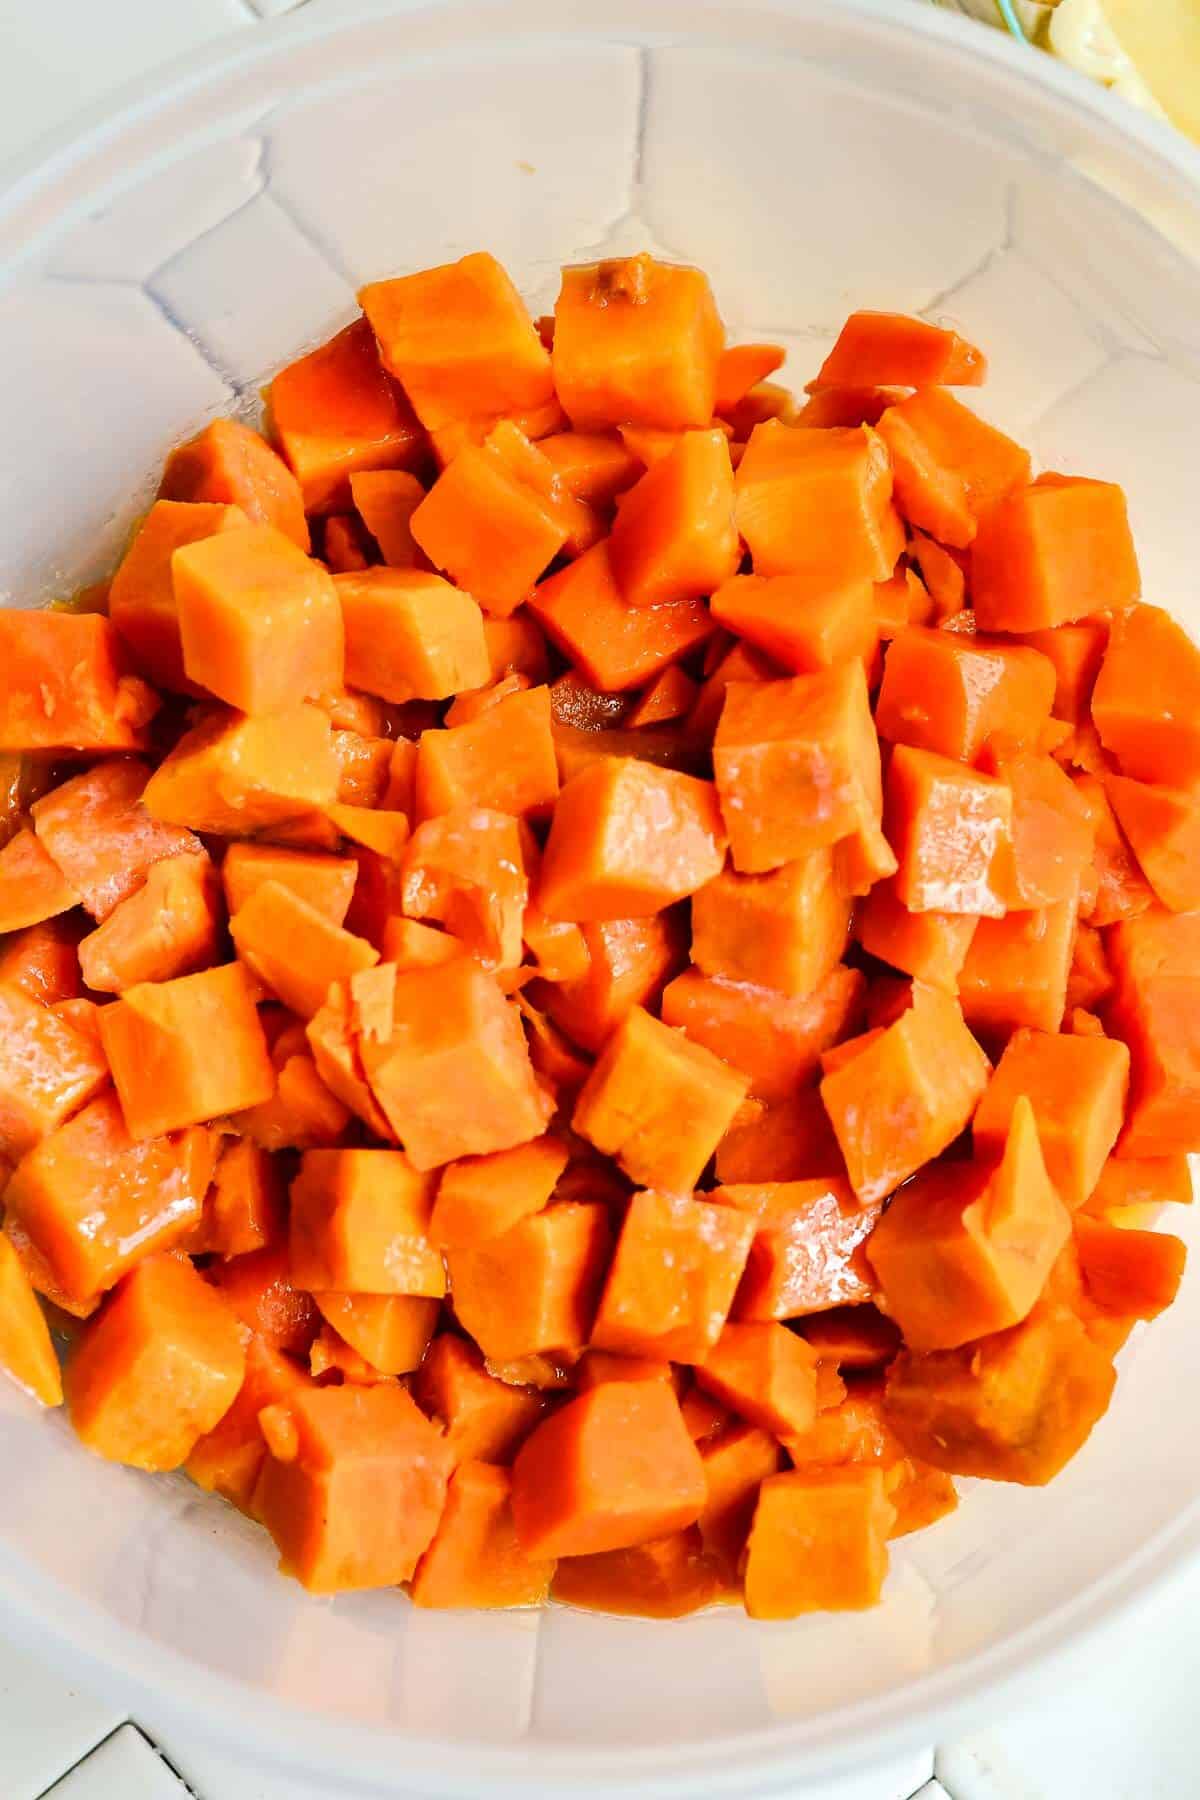 Cubed sweet potatoes, cooked, in a large glass bowl.